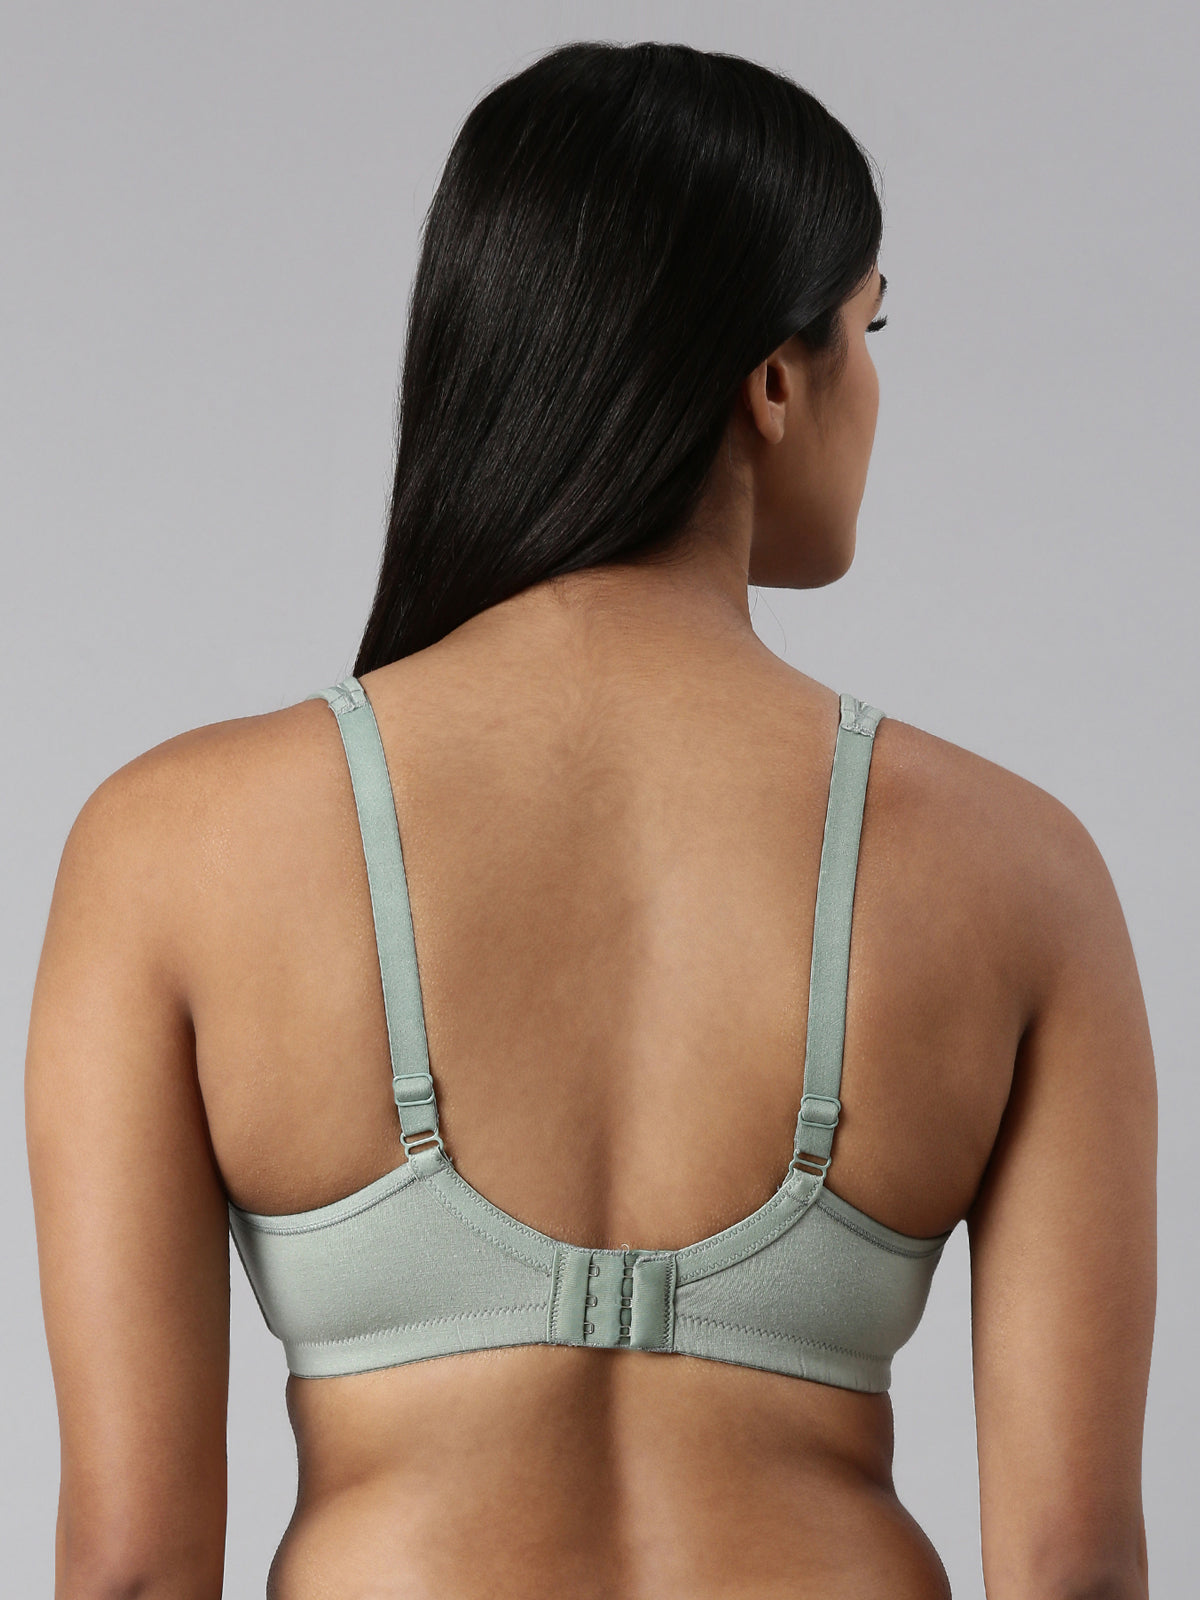 blossom-cover and hold-iceberg green4-support bra